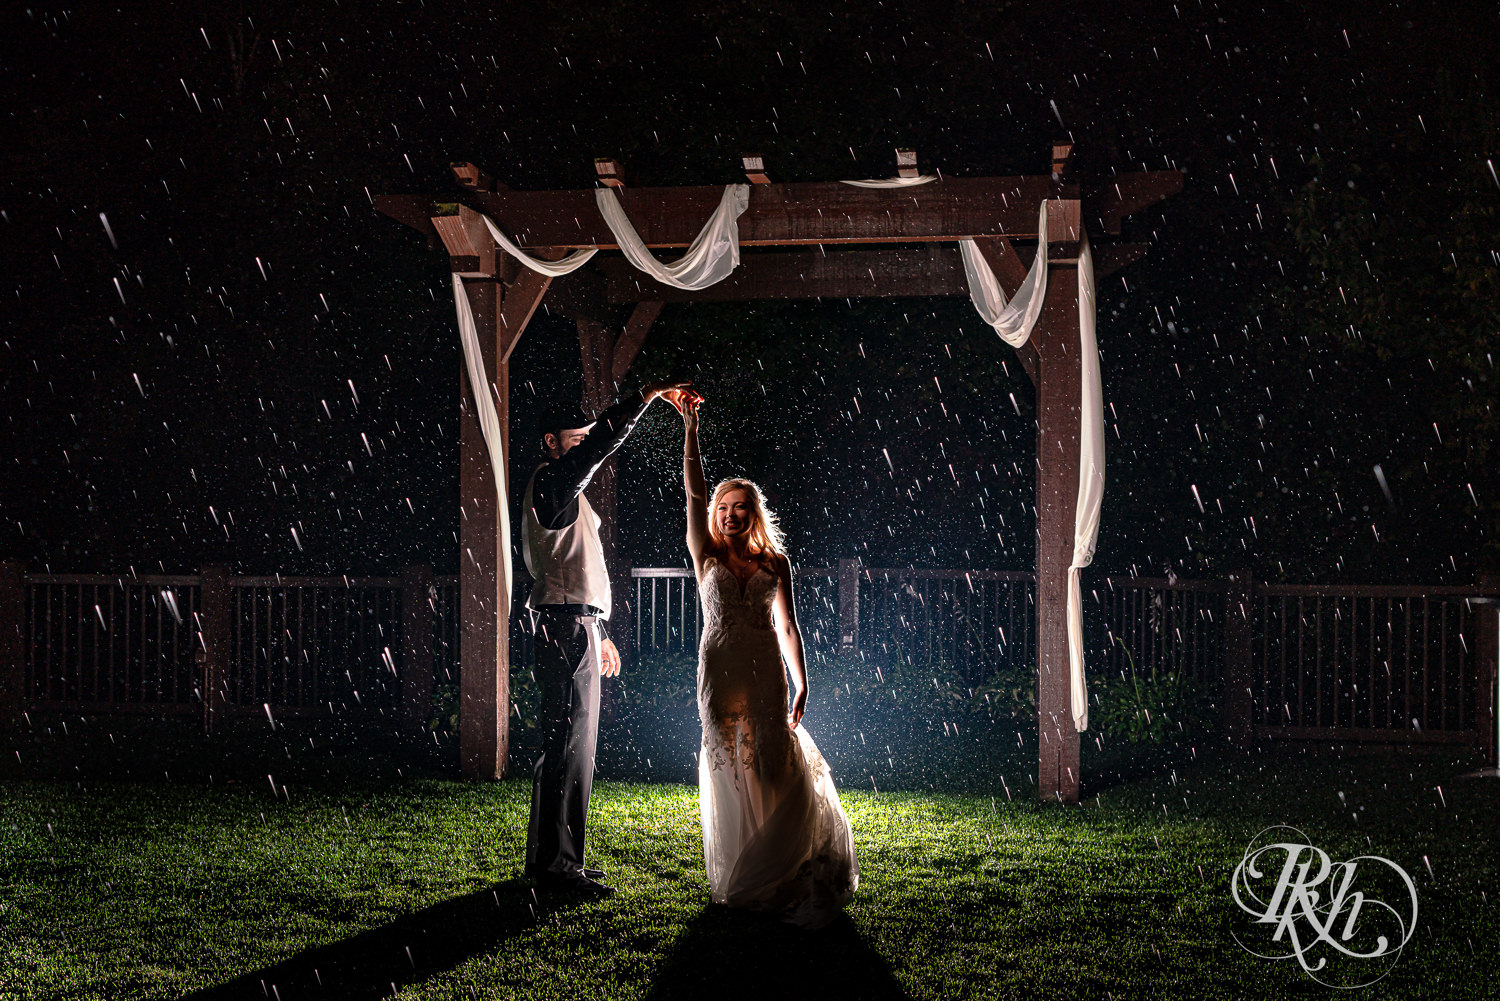 Bride and groom dance in the rain on wedding day at Bunker Hills Event Center in Coon Rapids, Minnesota.